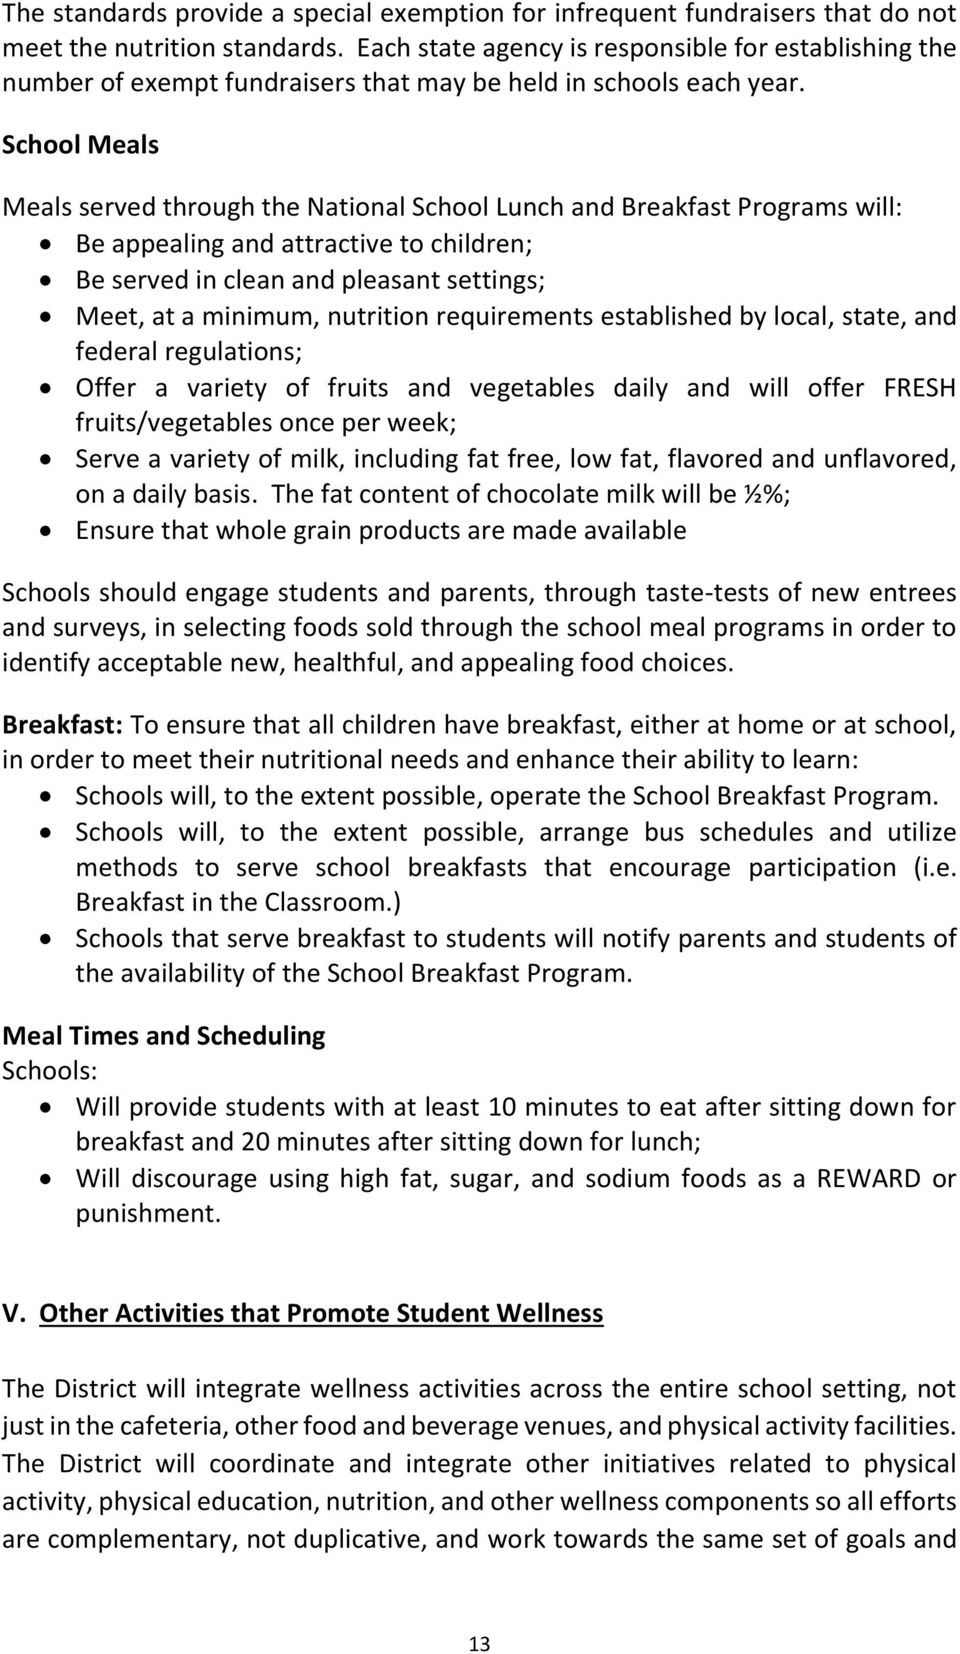 School Meals Meals served through the National School Lunch and Breakfast Programs will: Be appealing and attractive to children; Be served in clean and pleasant settings; Meet, at a minimum,